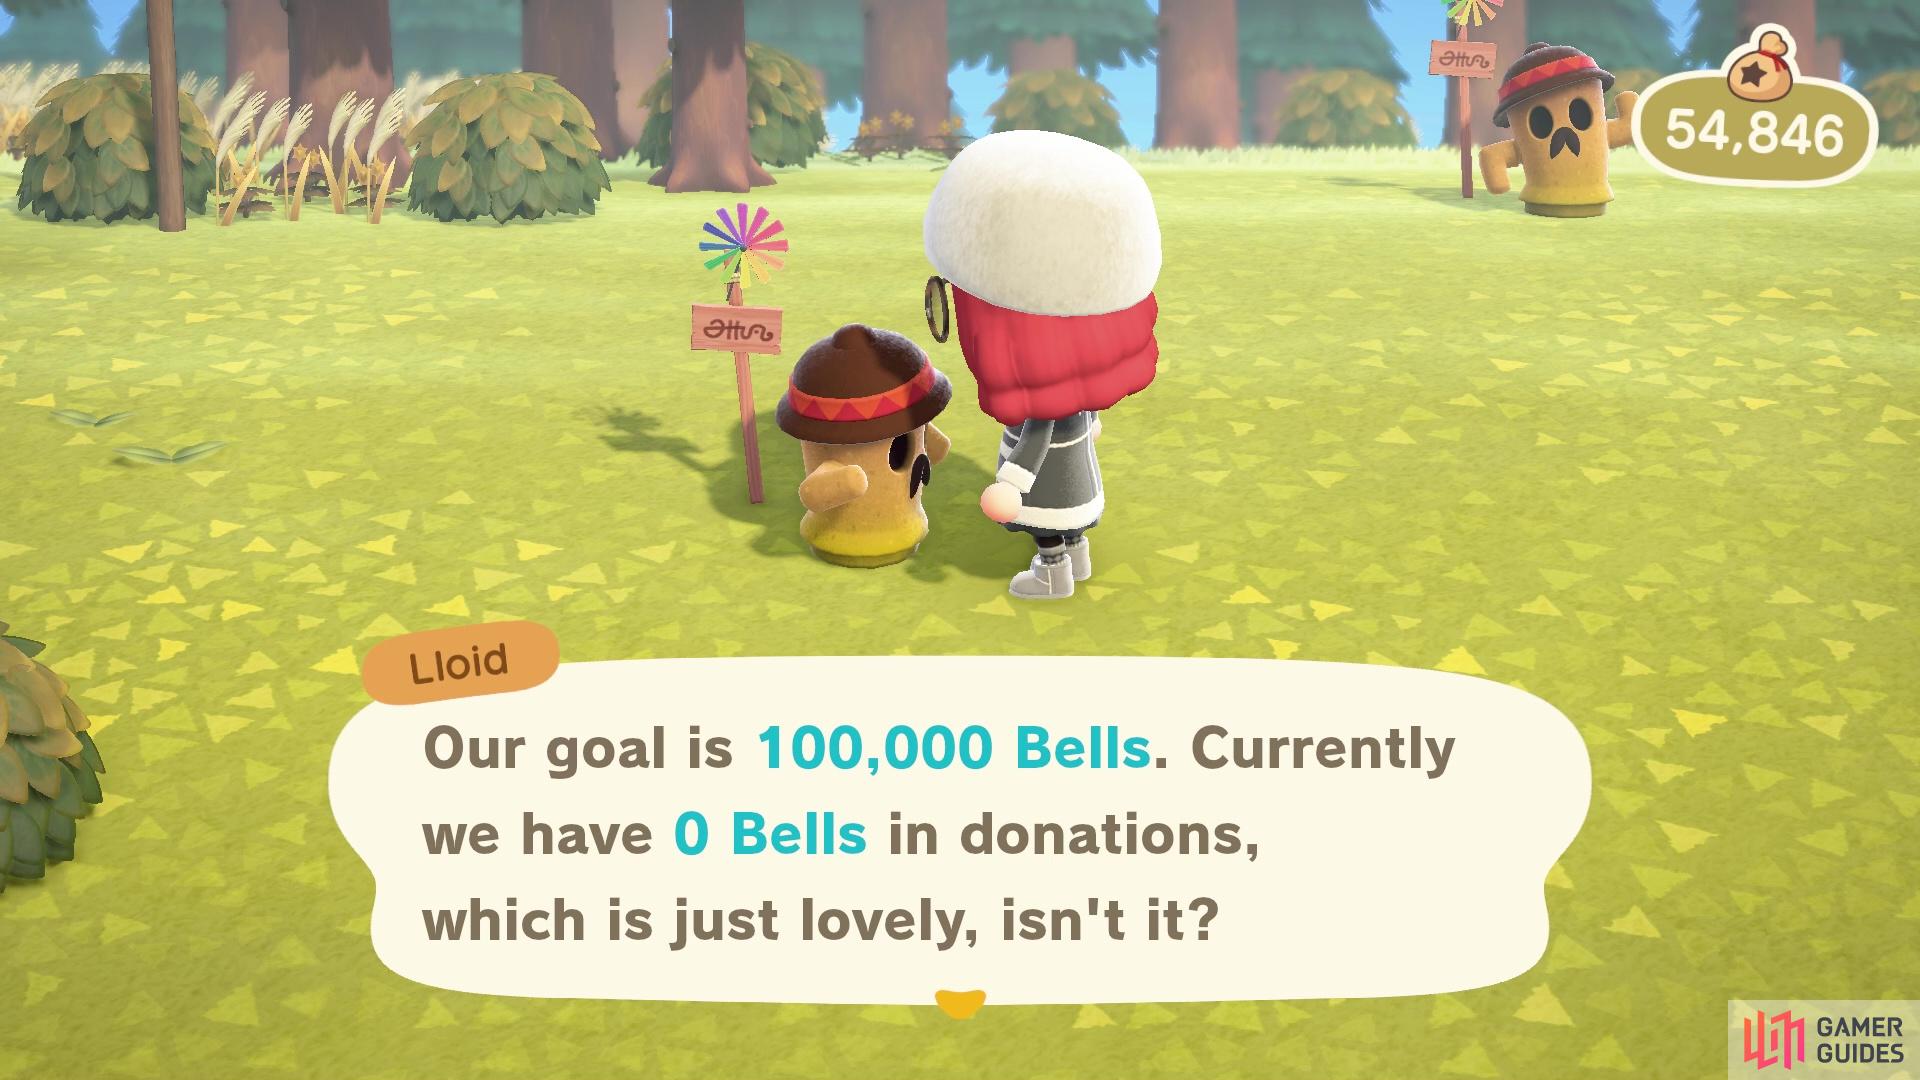 You'll need 100,000 Bells for Tortimer's shop!